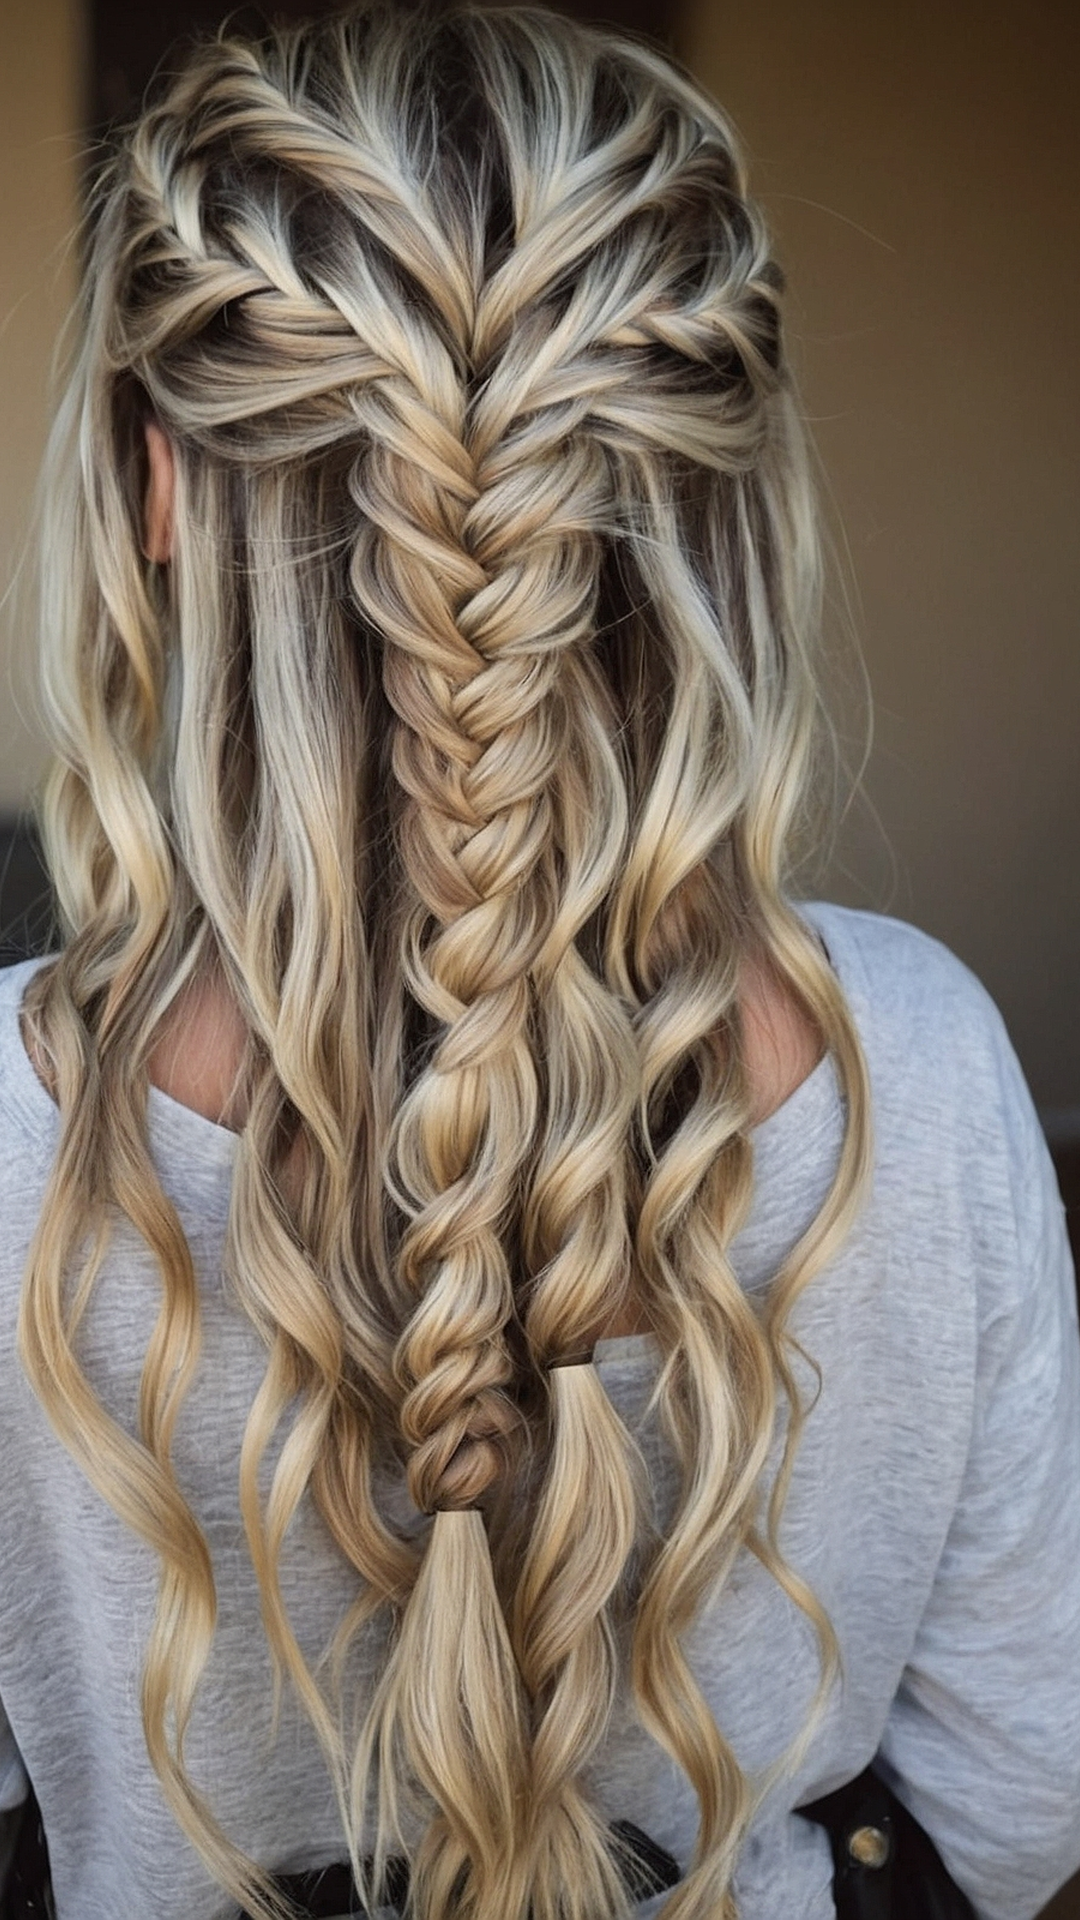 Twisted Beauty: Creative Braided Hairstyles